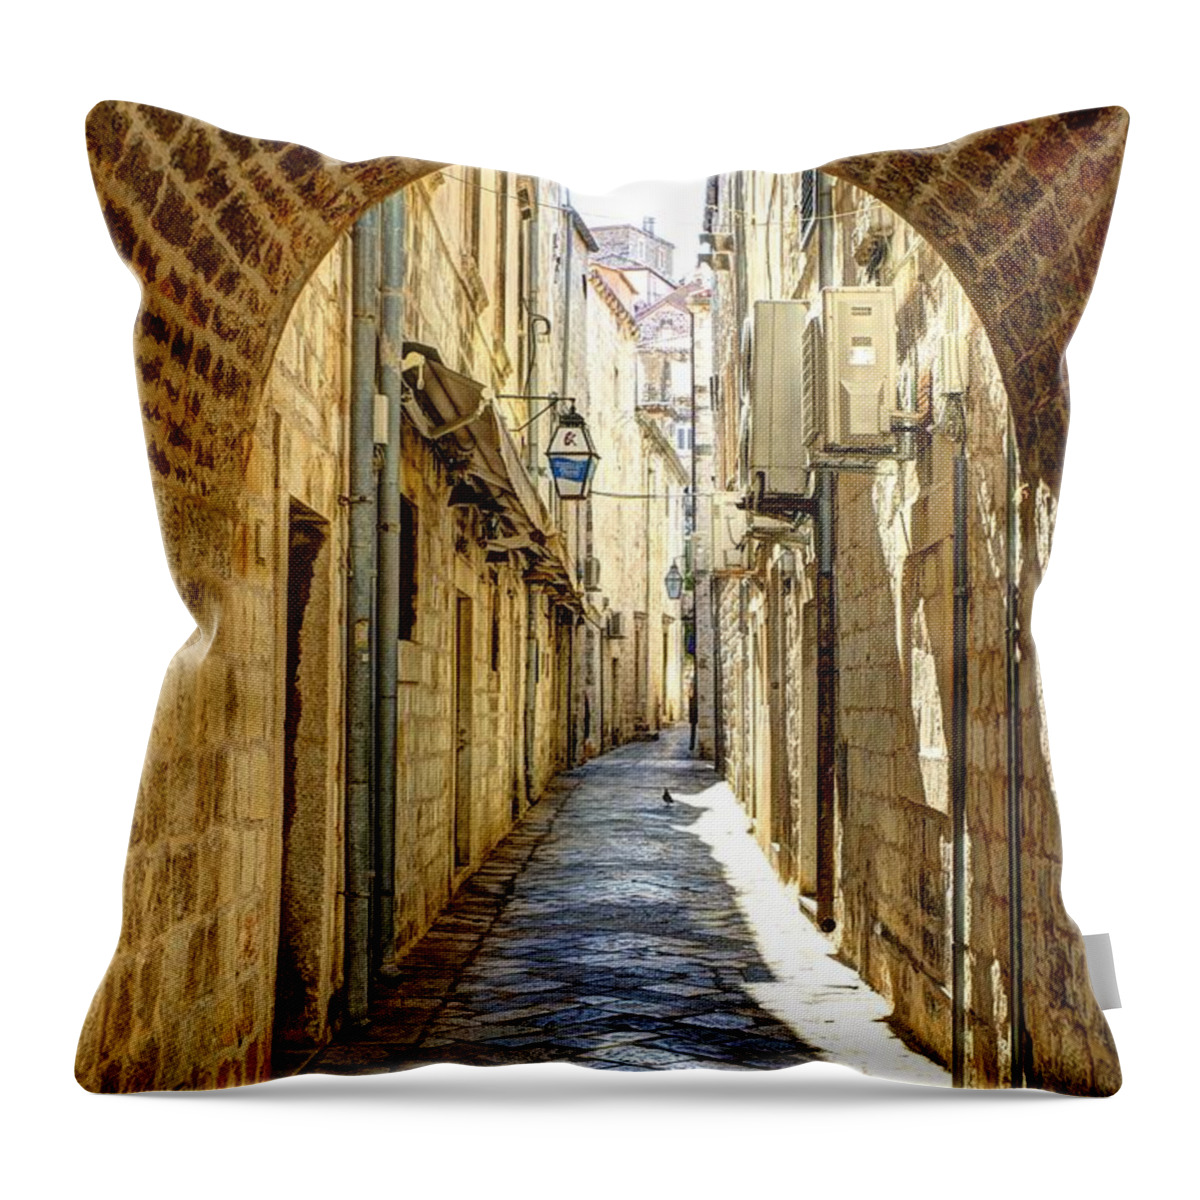 Color Throw Pillow featuring the photograph Old City Walkway - Dubrovnik, Croatia by Crystal Nederman